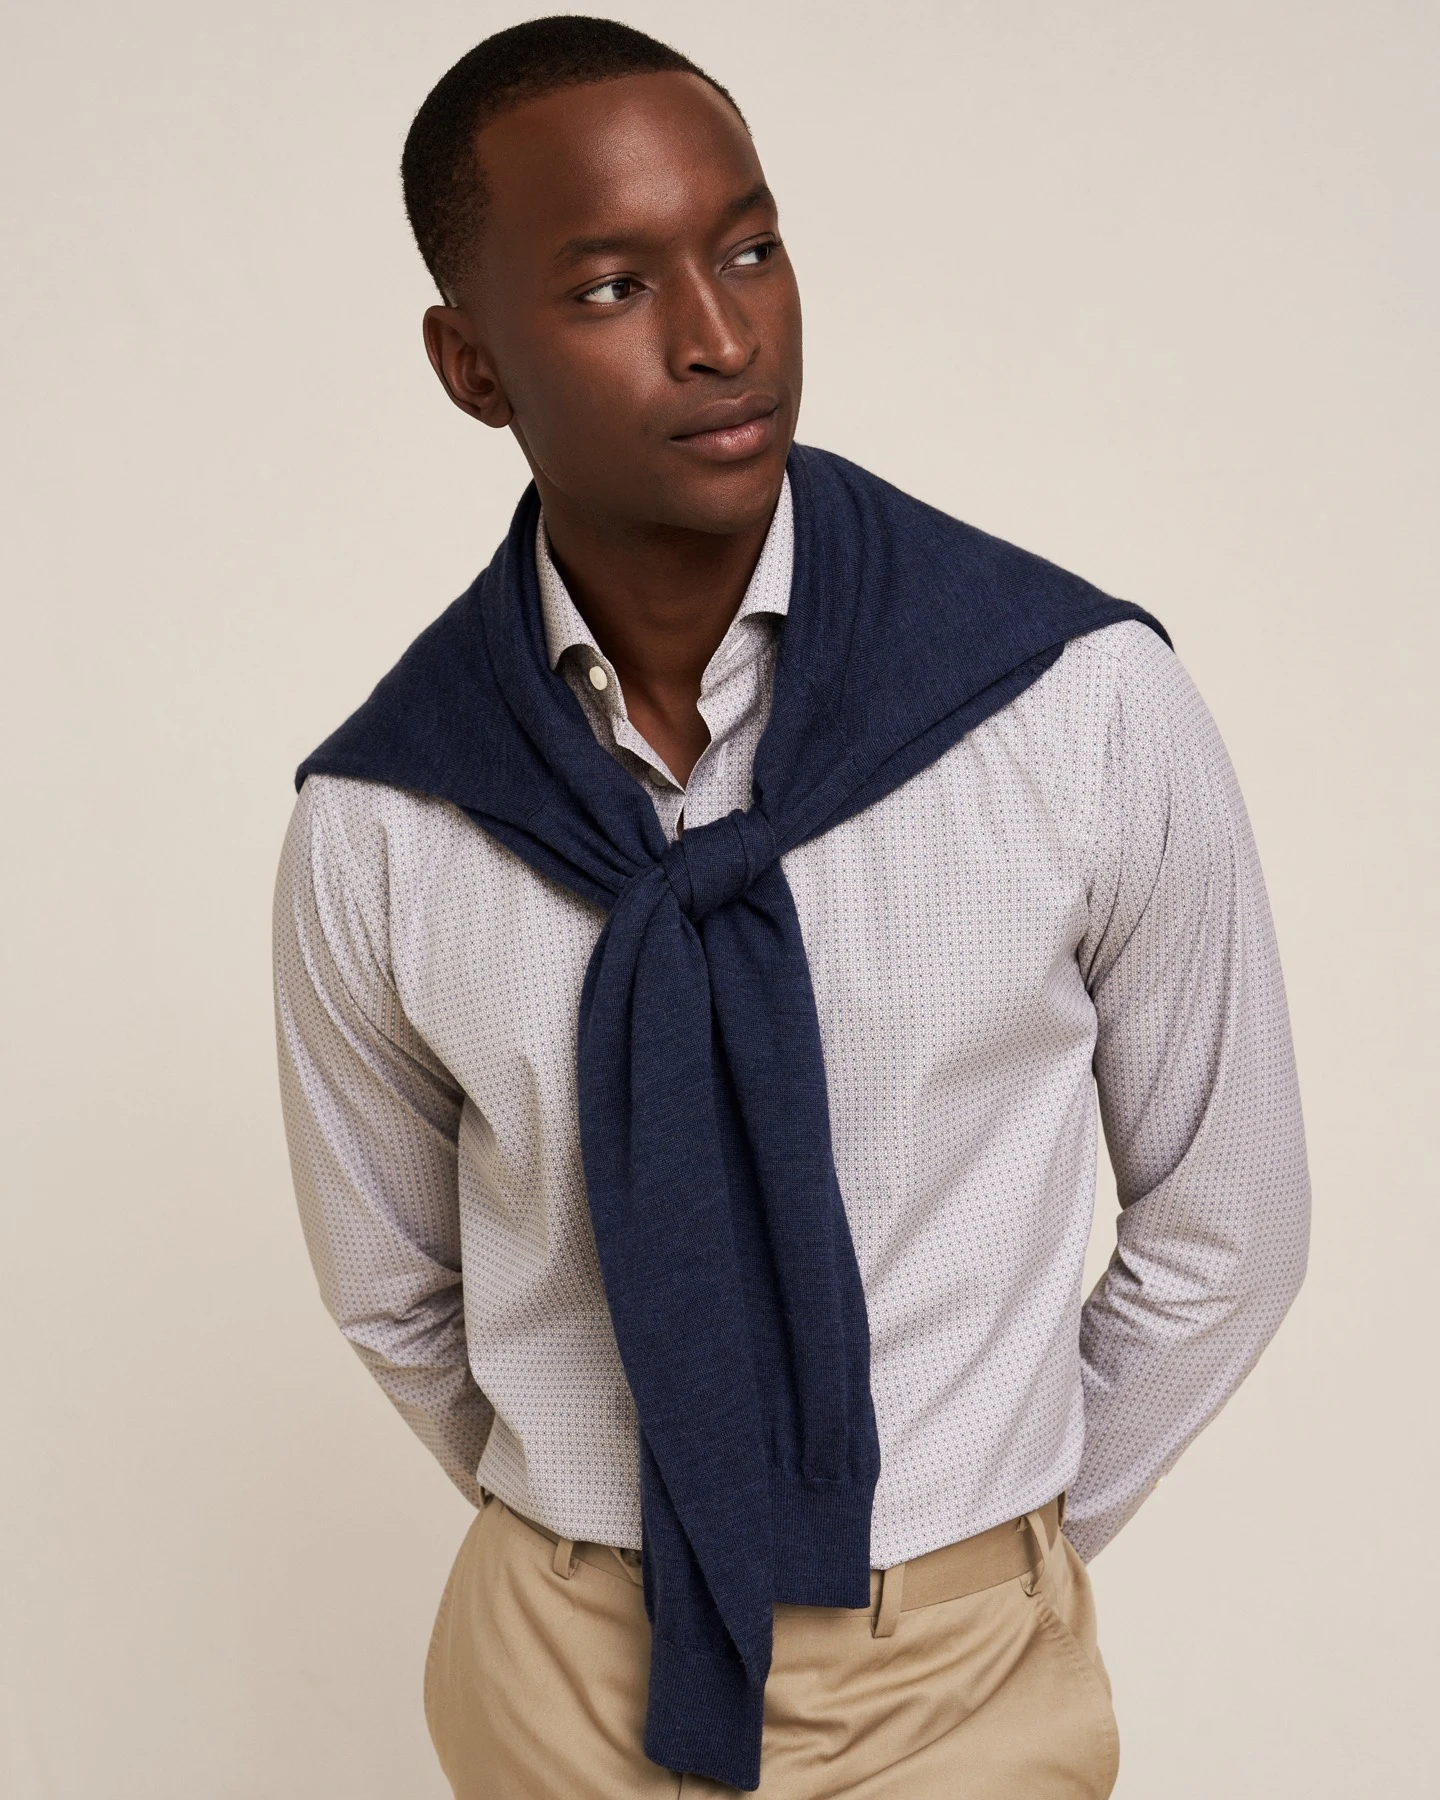 eton archive patterned shirt with knitted sweater over shoulders